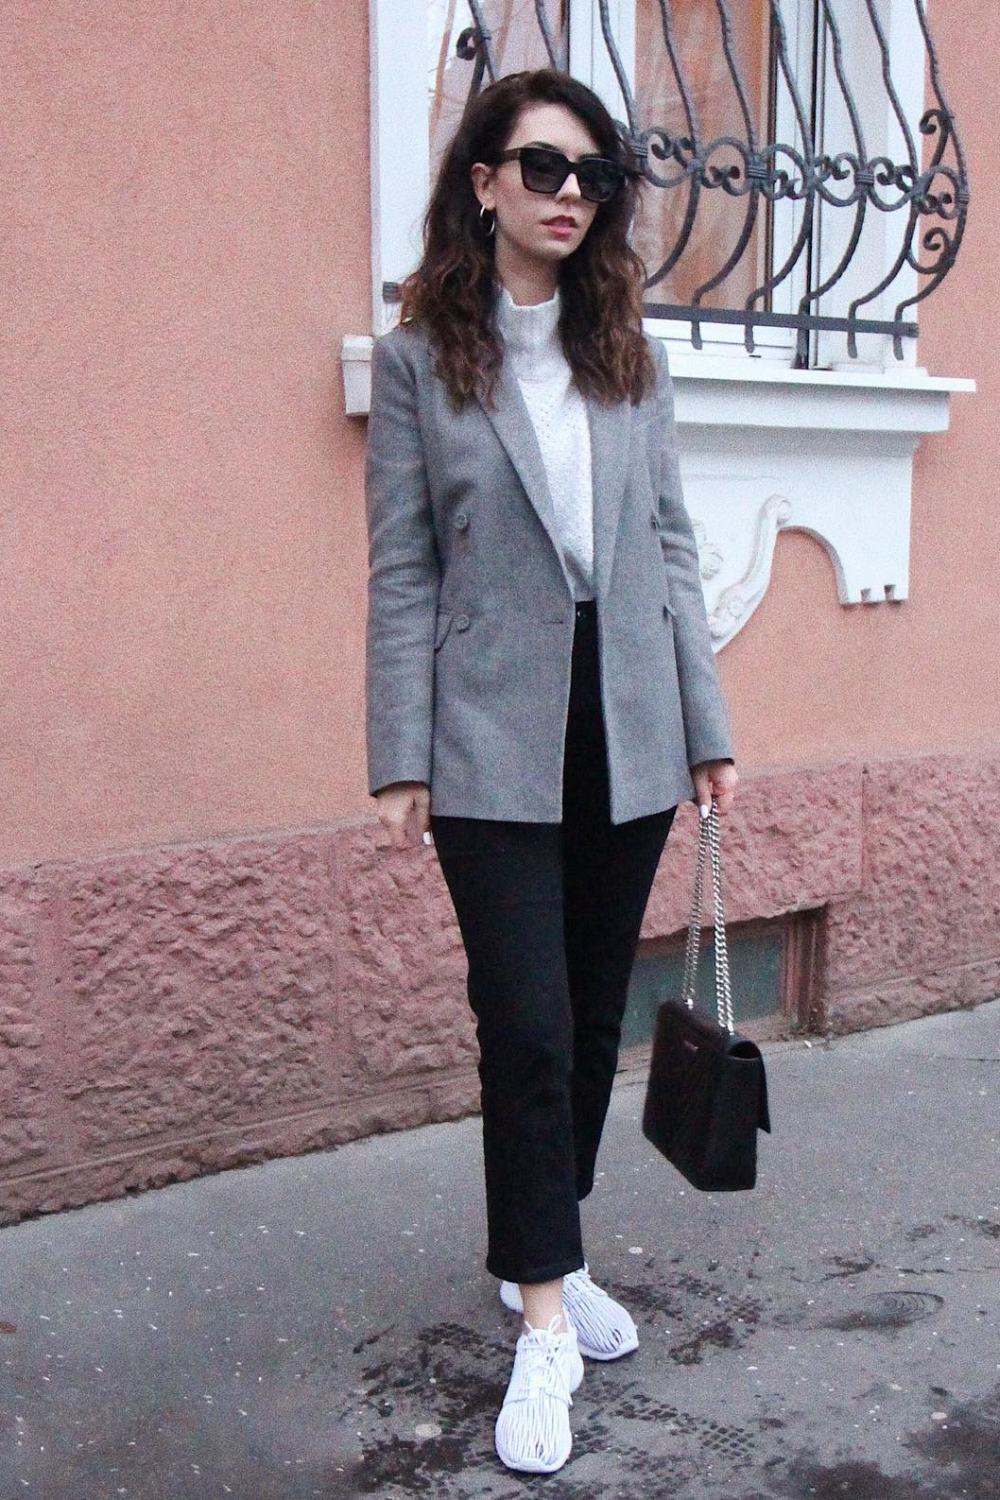 casual work outfits with sneakers - with gray blazer